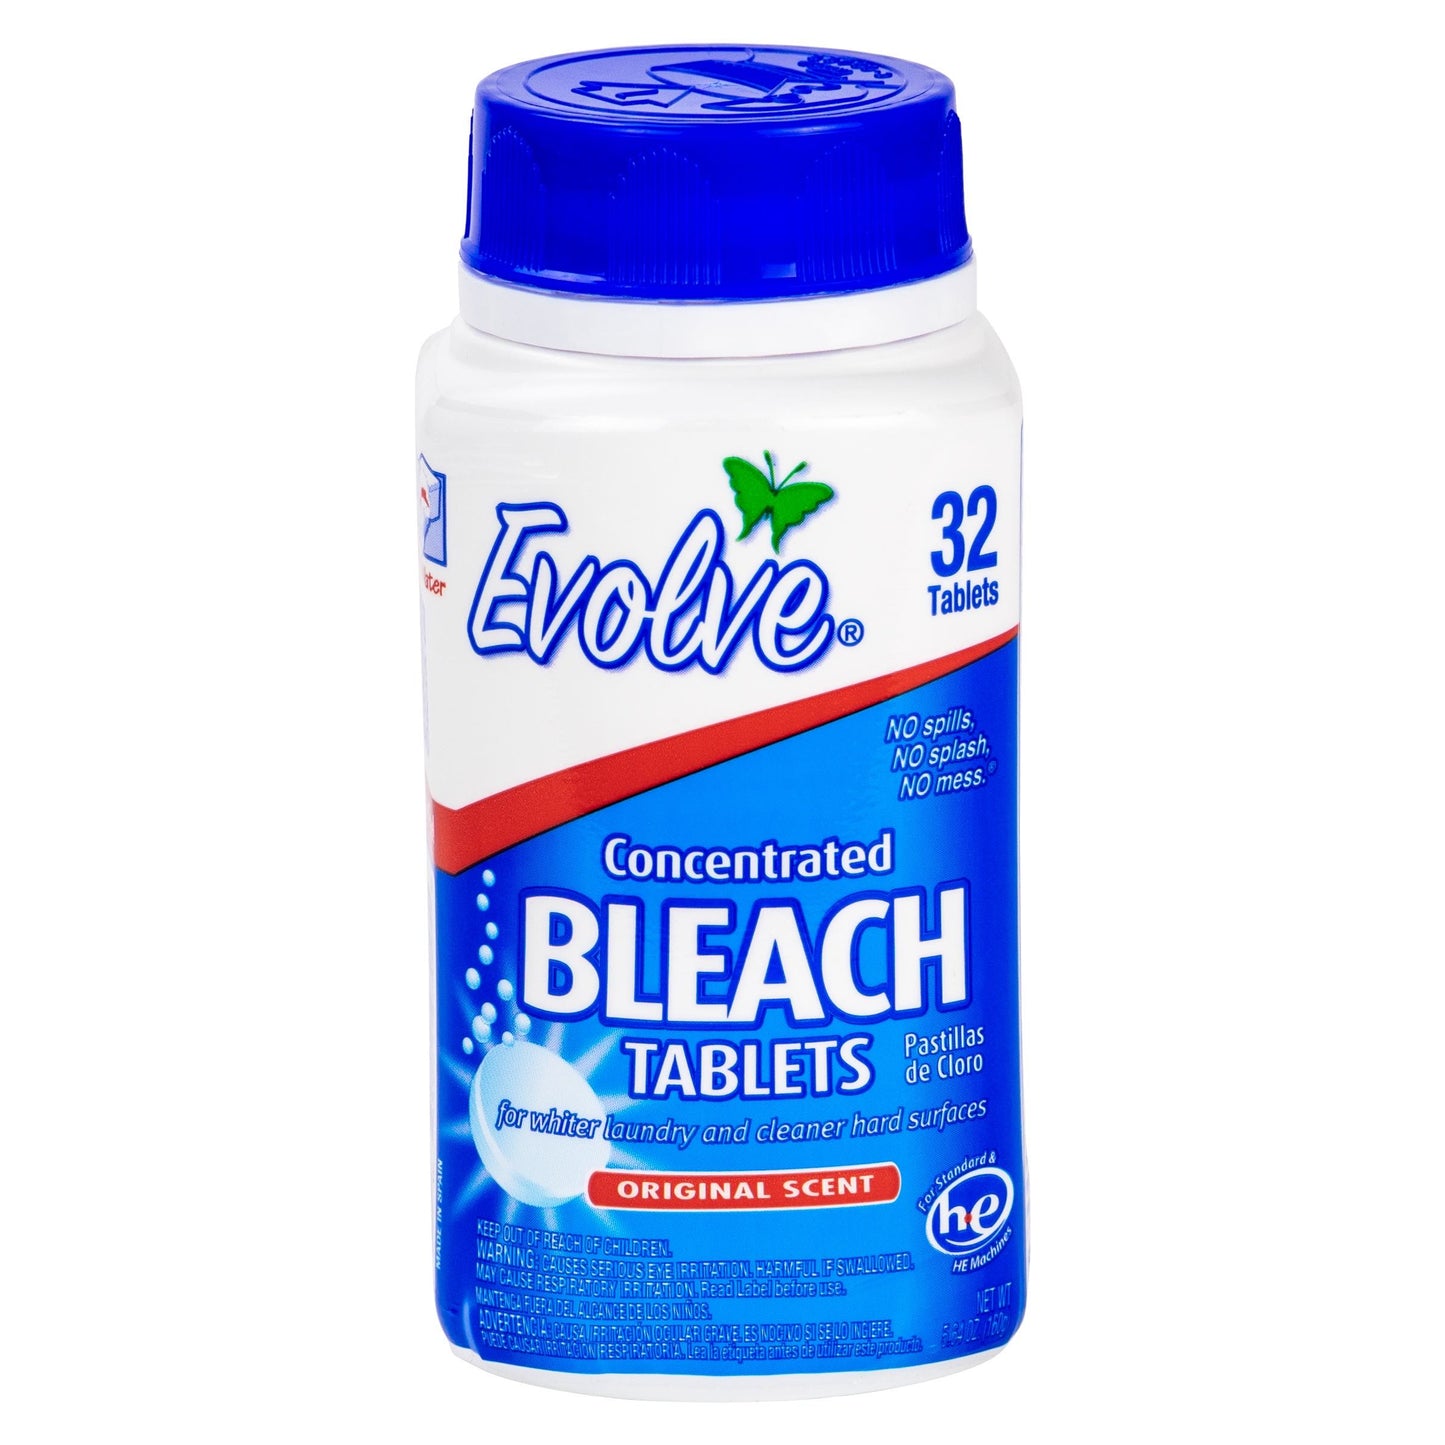 Evolve Bleach Tablets Ultra Concentrated, Original Scent, 32 ct.